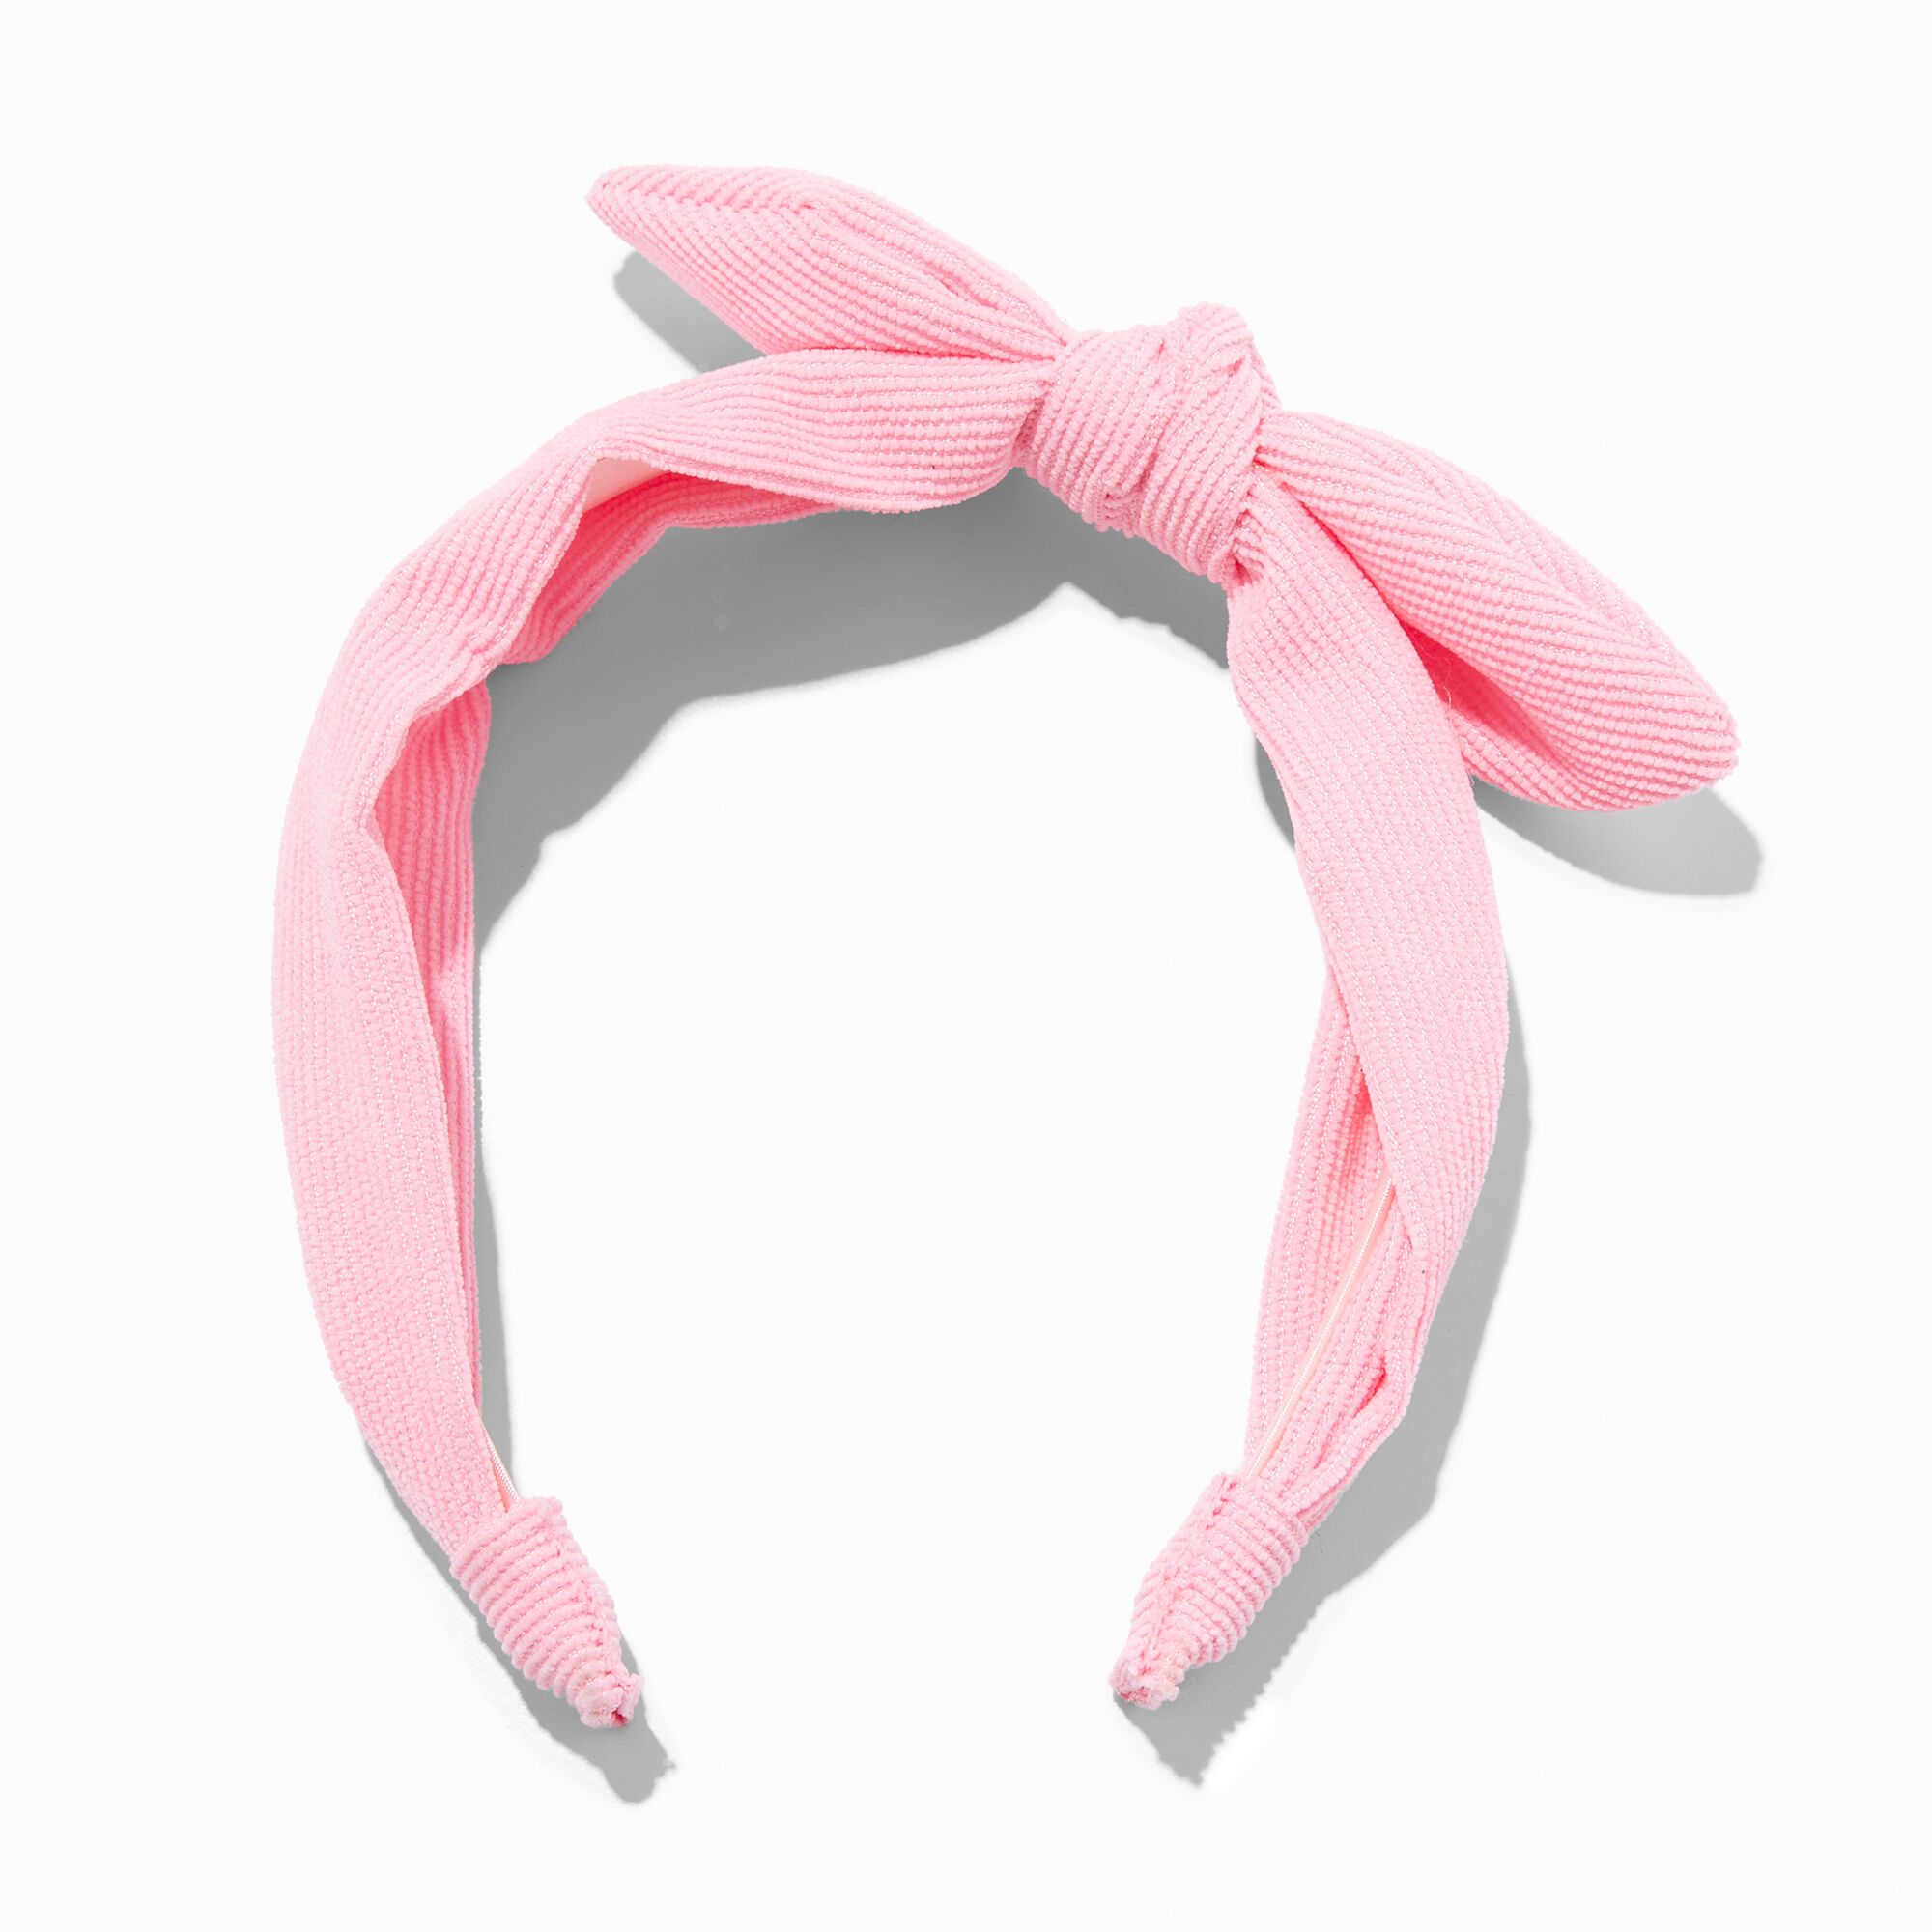 View Claires Club Corduroy Bow Headband Pink information